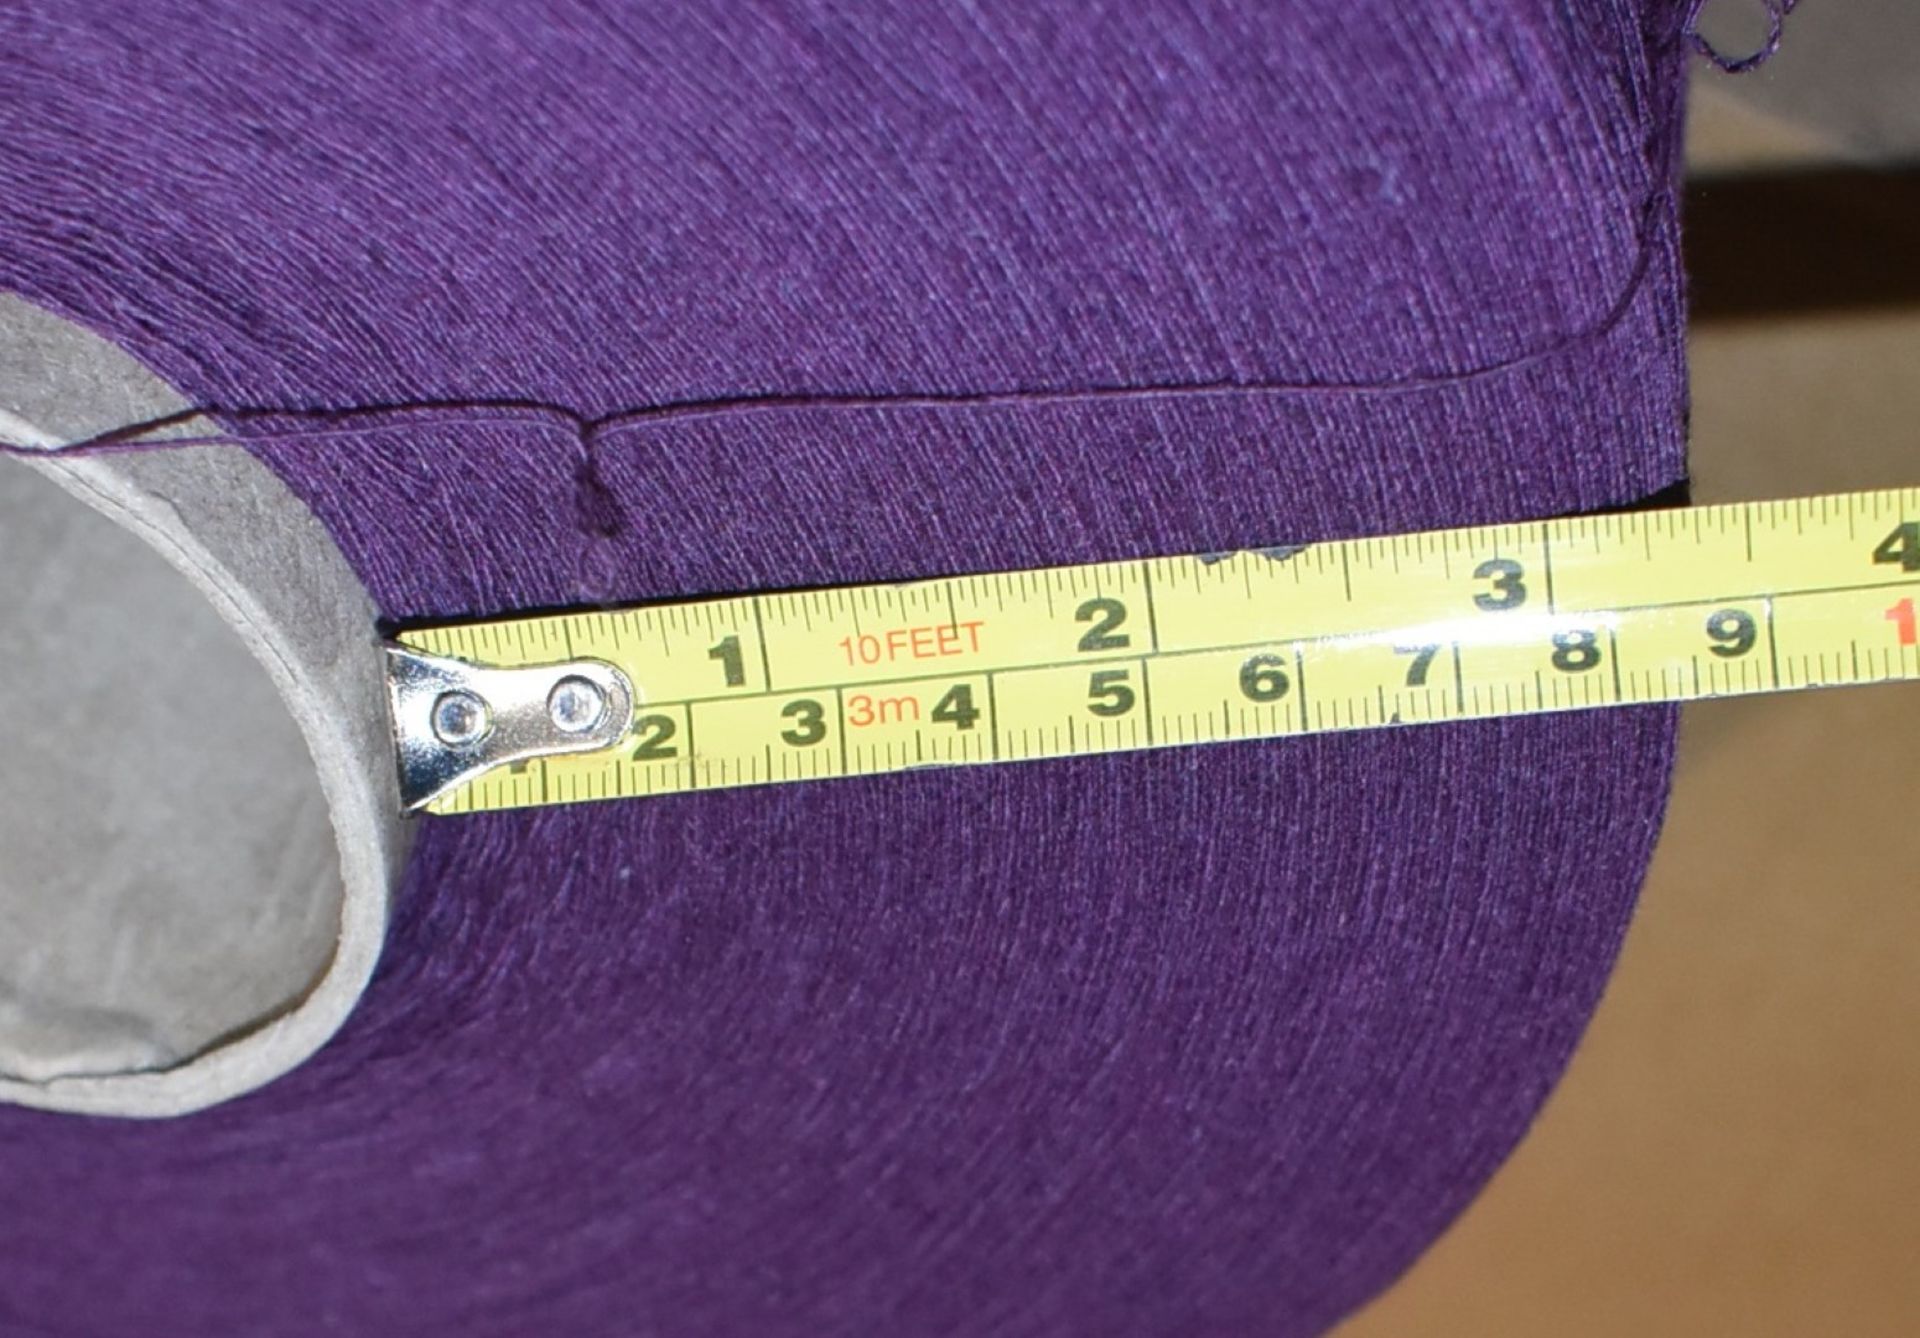 1 x Cone of 1/13 MicroCotton Knitting Yarn - Purple - Approx Weight: 2,300g - New Stock ABL Yarn - Image 9 of 9